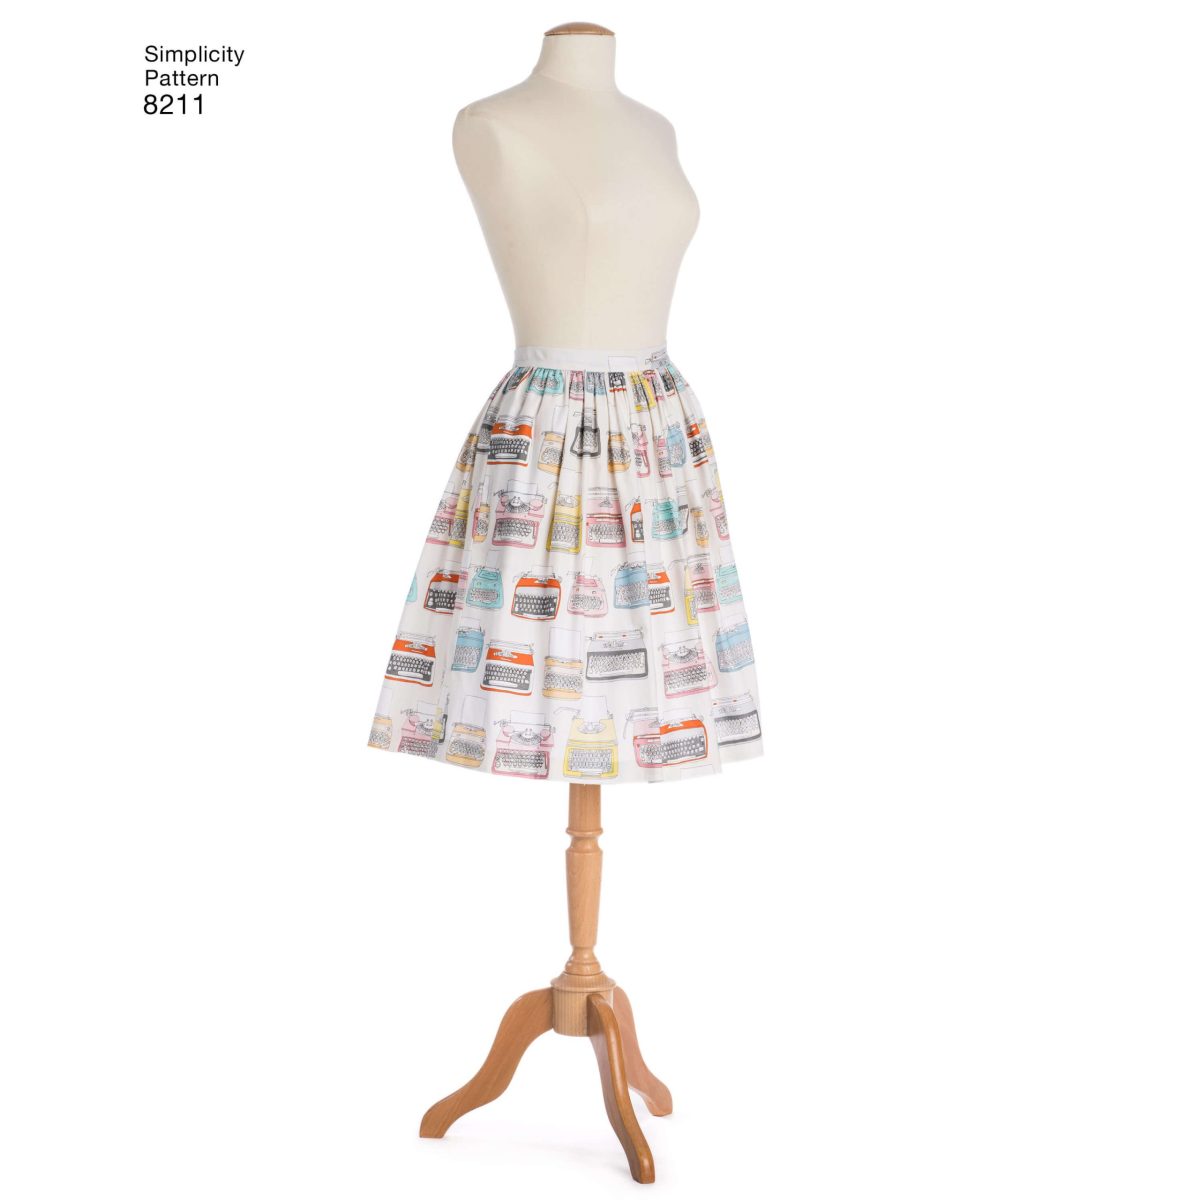 Simplicity Sewing Pattern 8211 Misses' Dirndl Skirts in Three Lengths